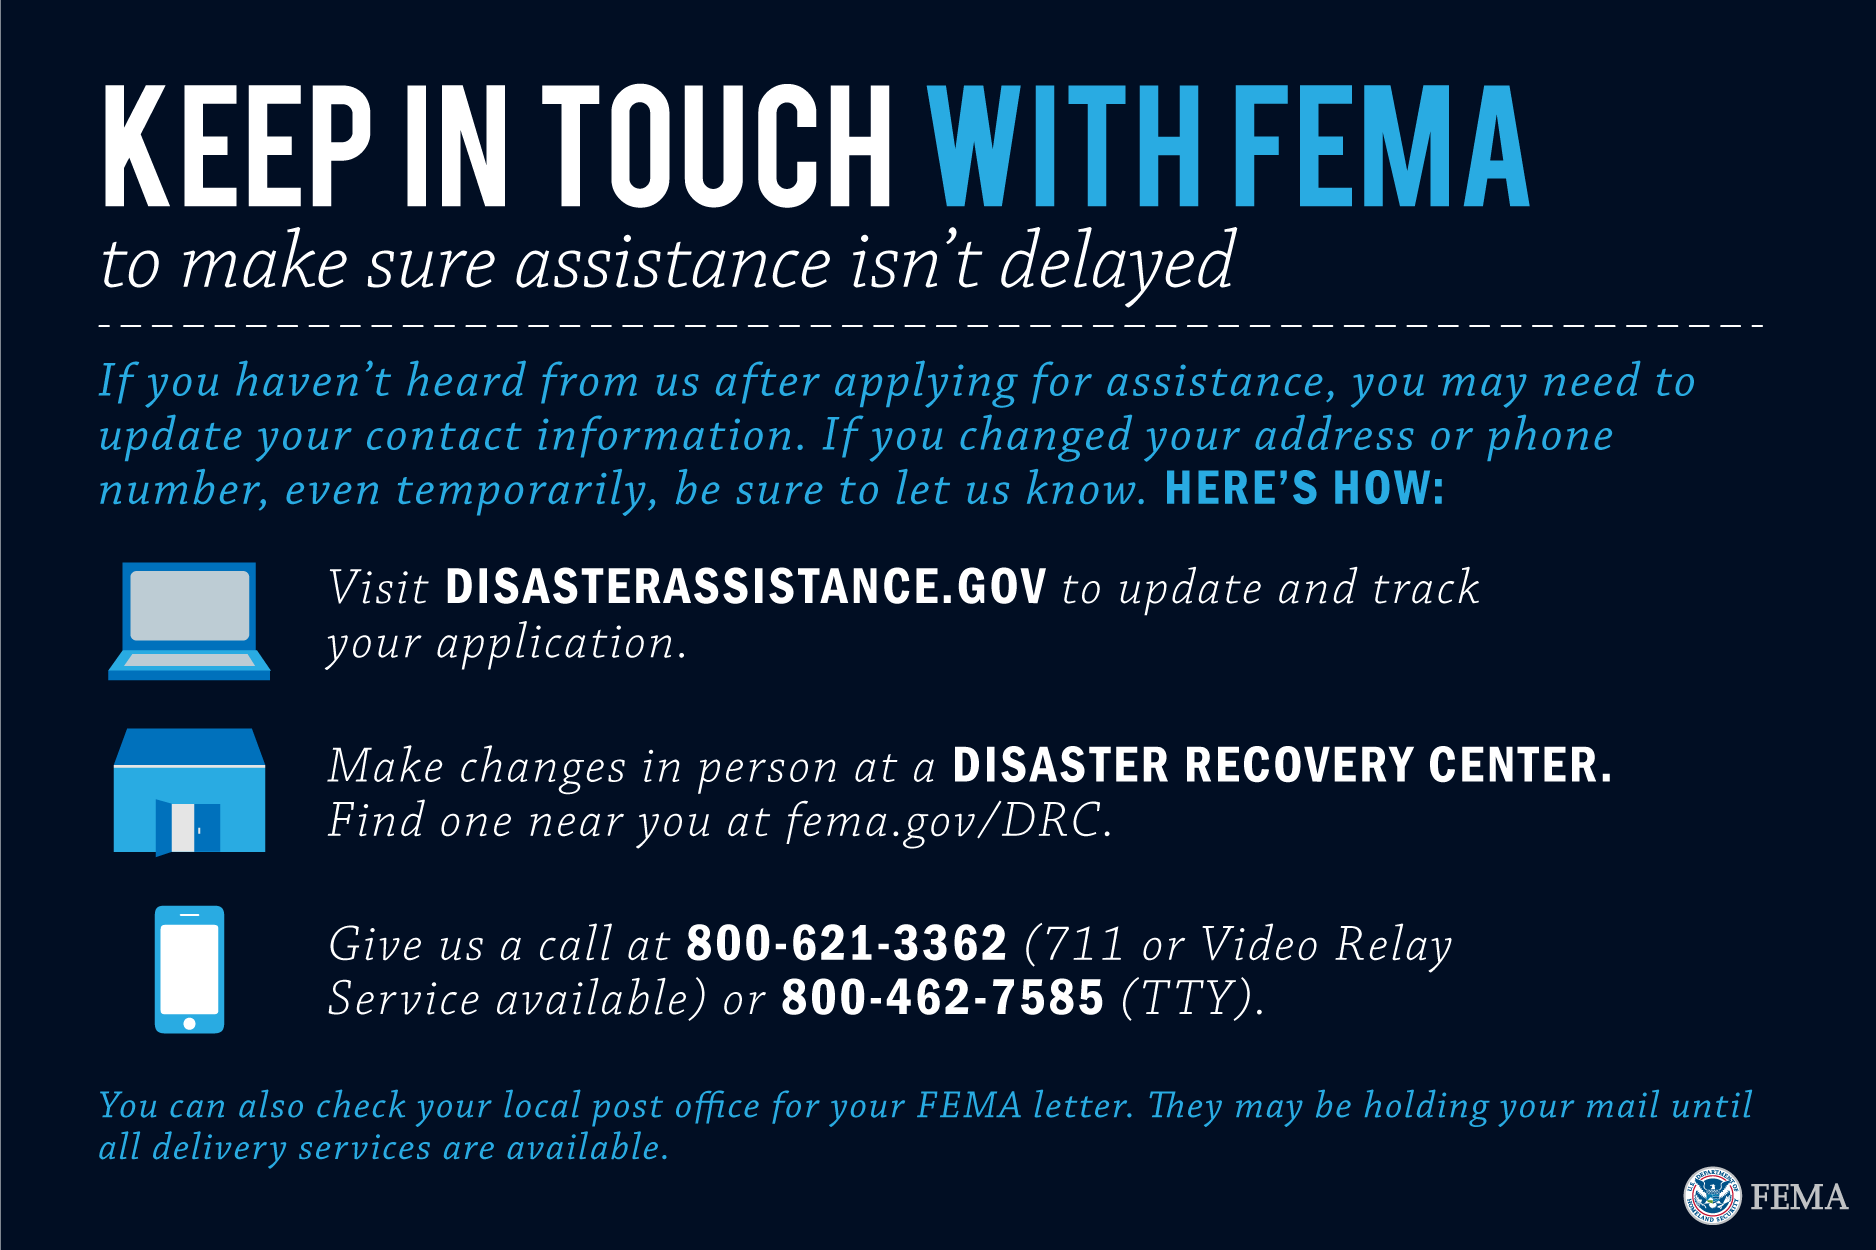  Visit disasterassistance.gov to update and track your application. Make changes in person at a disaster recovery center. Find one near you at fema.gov/DRC. Give us a call at 800-621-3362 (711 or Video Relay Service available) or 800-462-7585 (TTY). You can also check your local post office for your FEMA letter. They may be holding your mail until all delivery services are available.